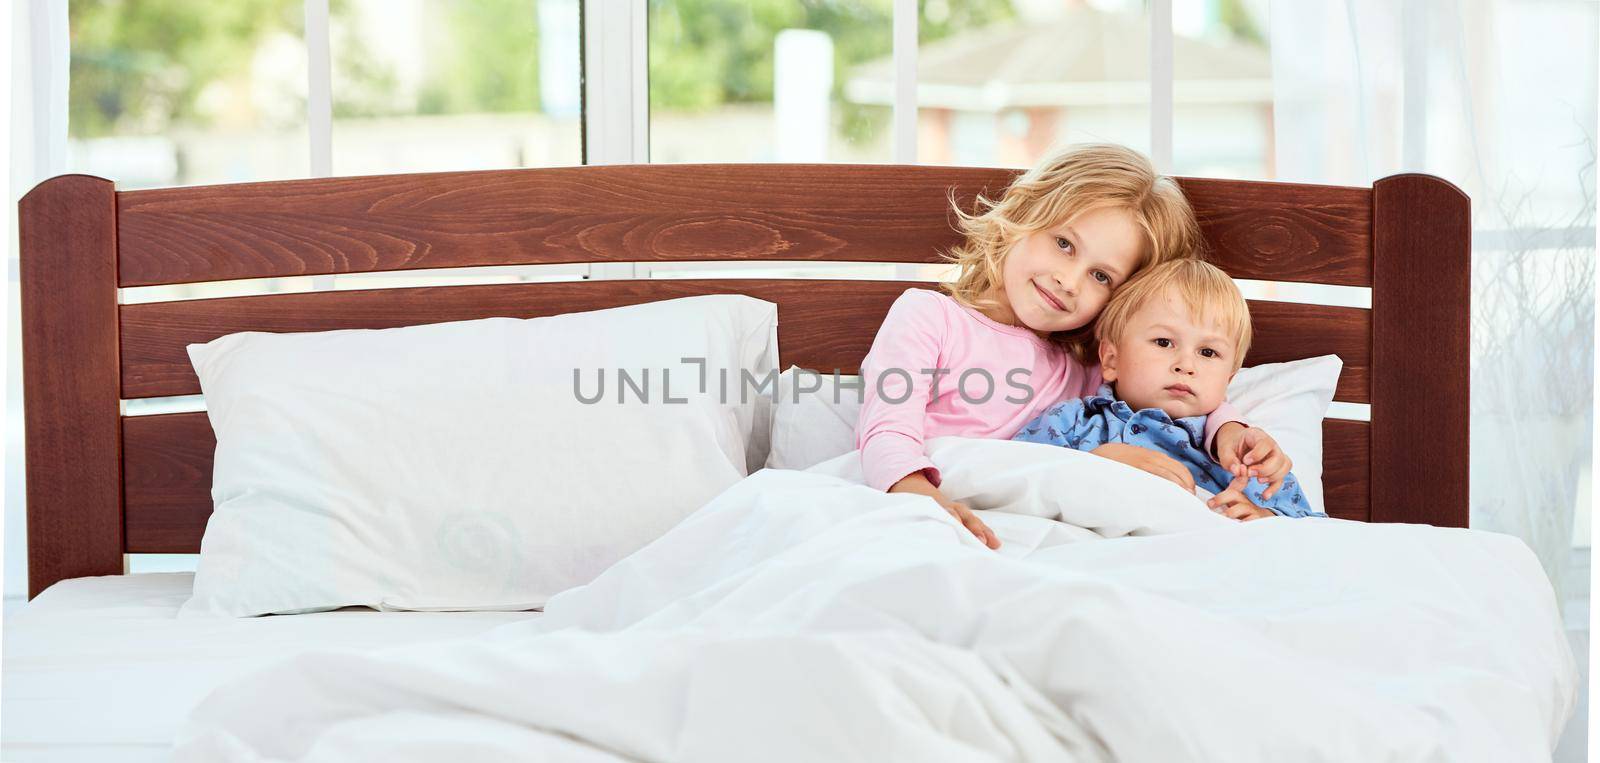 Cute little brother and sister in pajamas and looking at camera with smile while lying together in a large bed at home. Quarantine. Enjoying weekend at home. Family